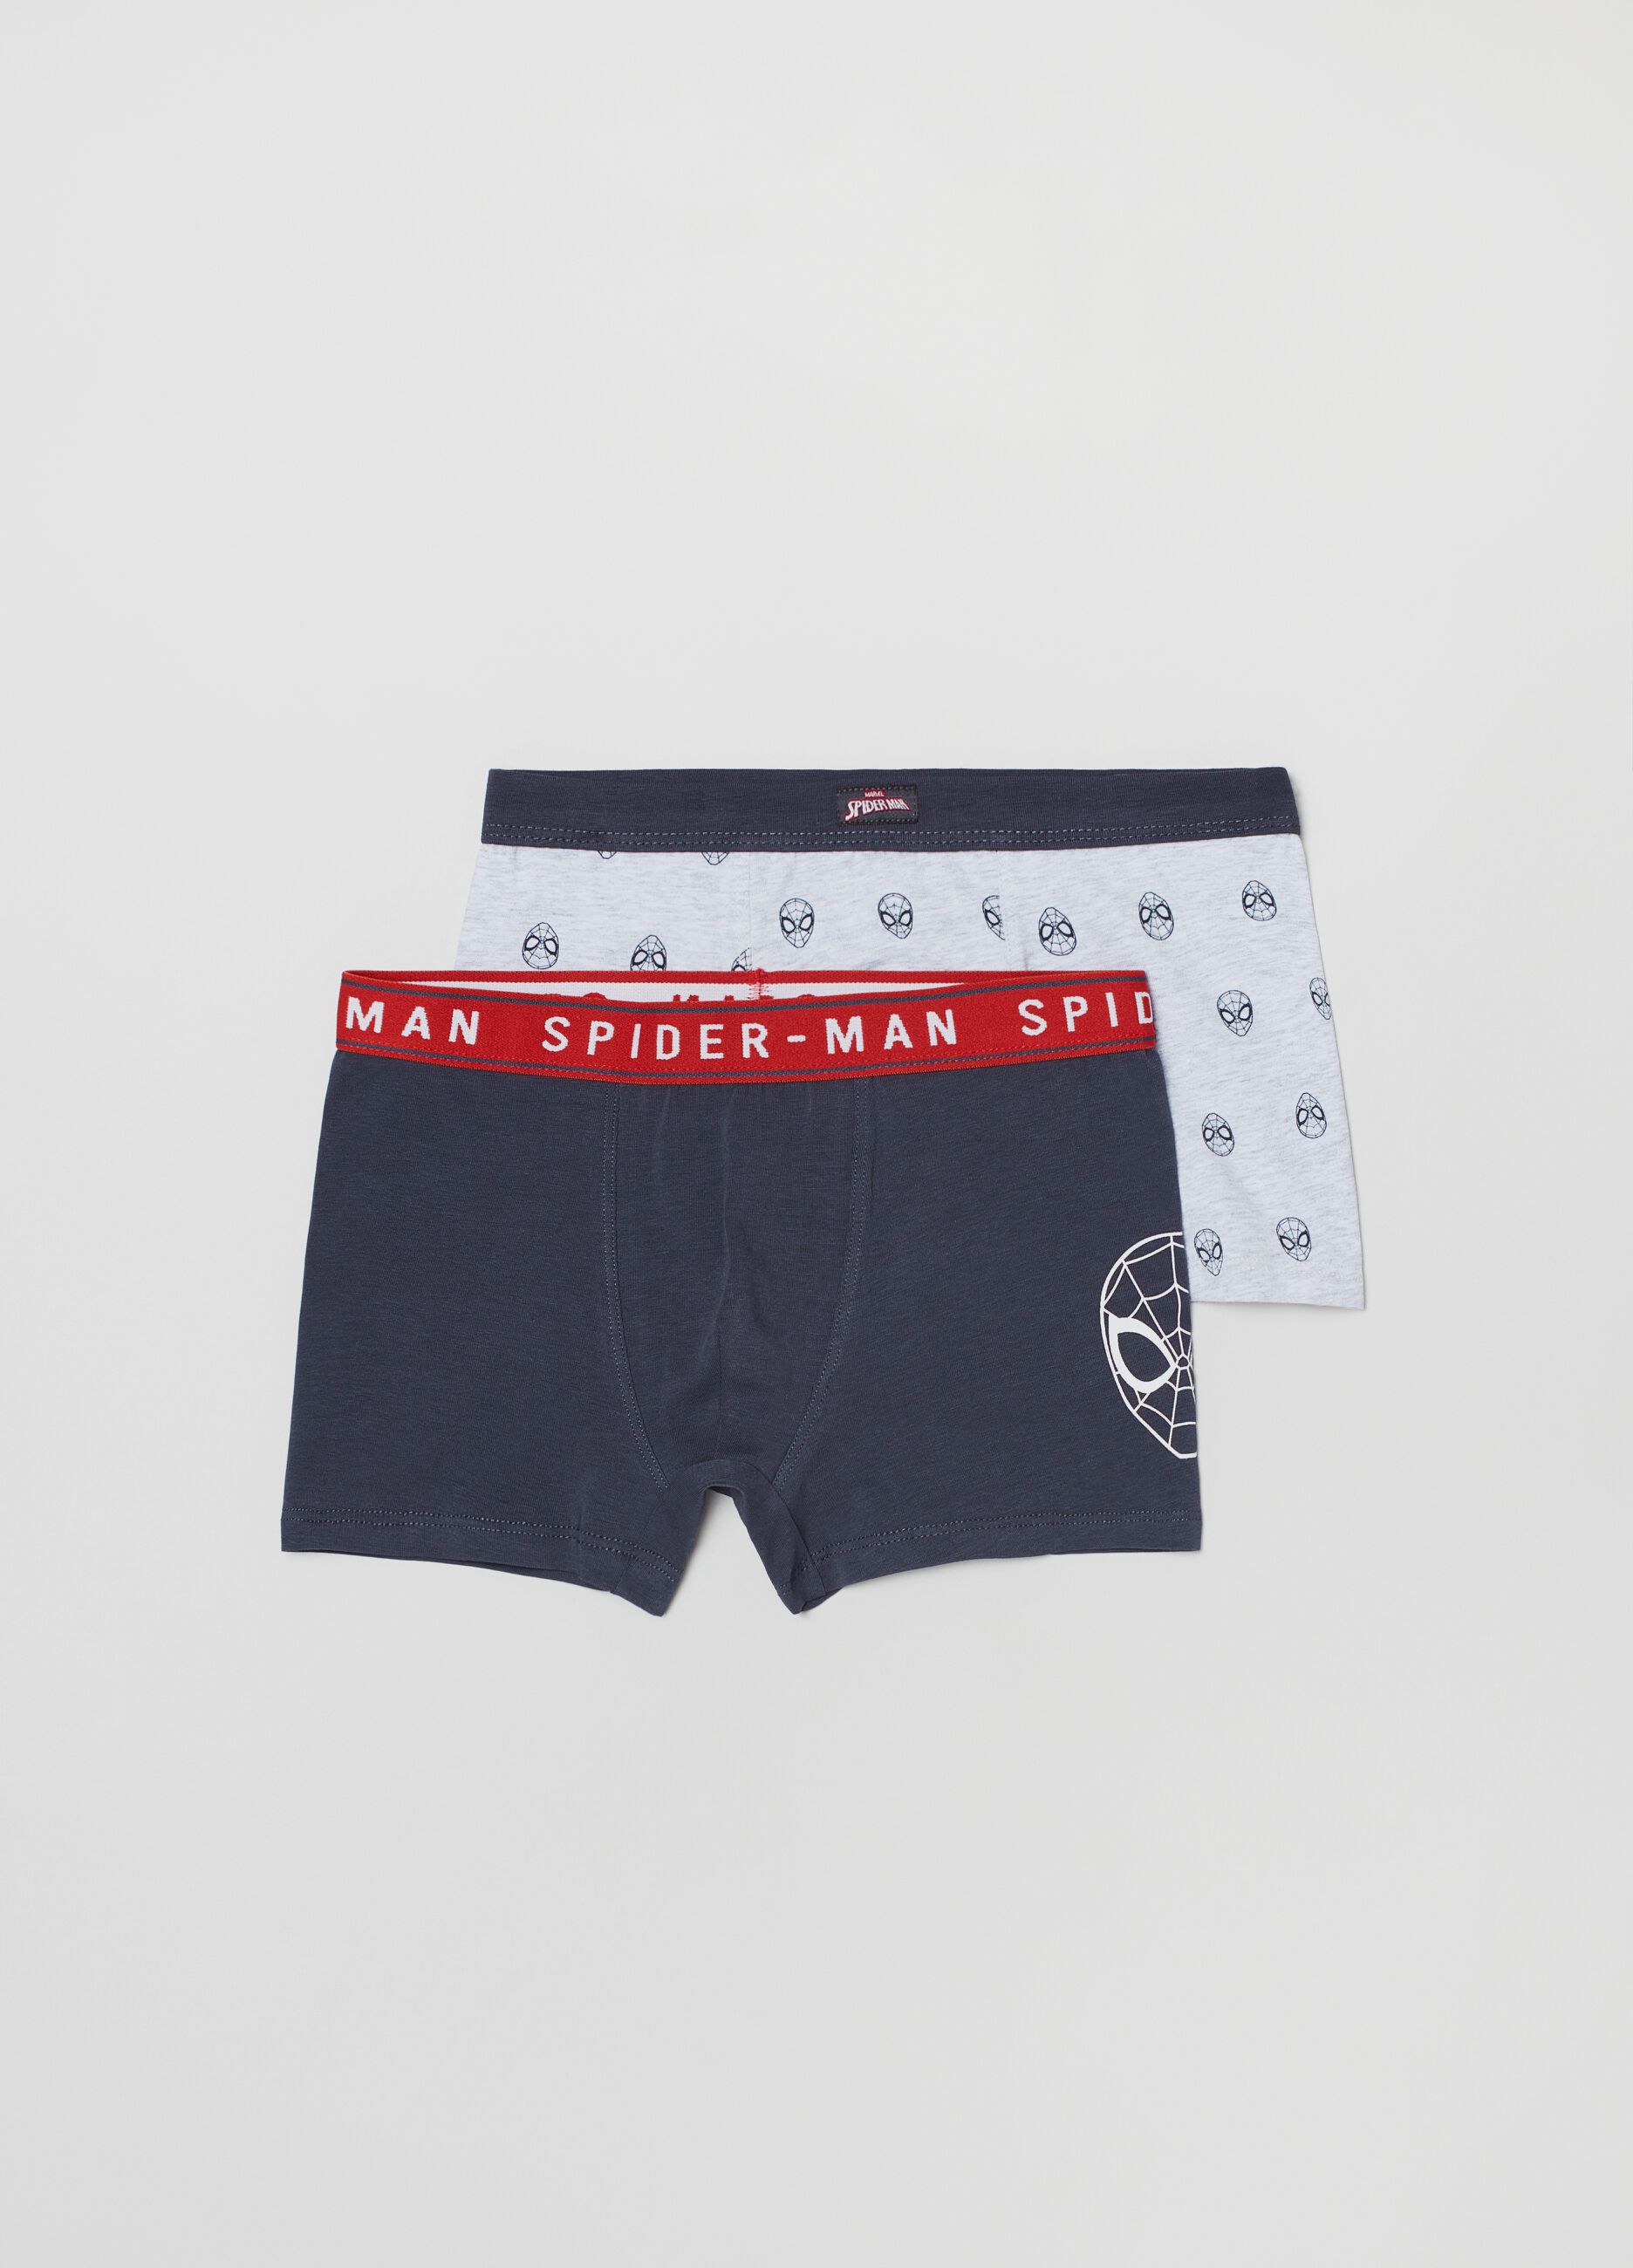 Two-pack boxer shorts with Marvel Spider-Man print